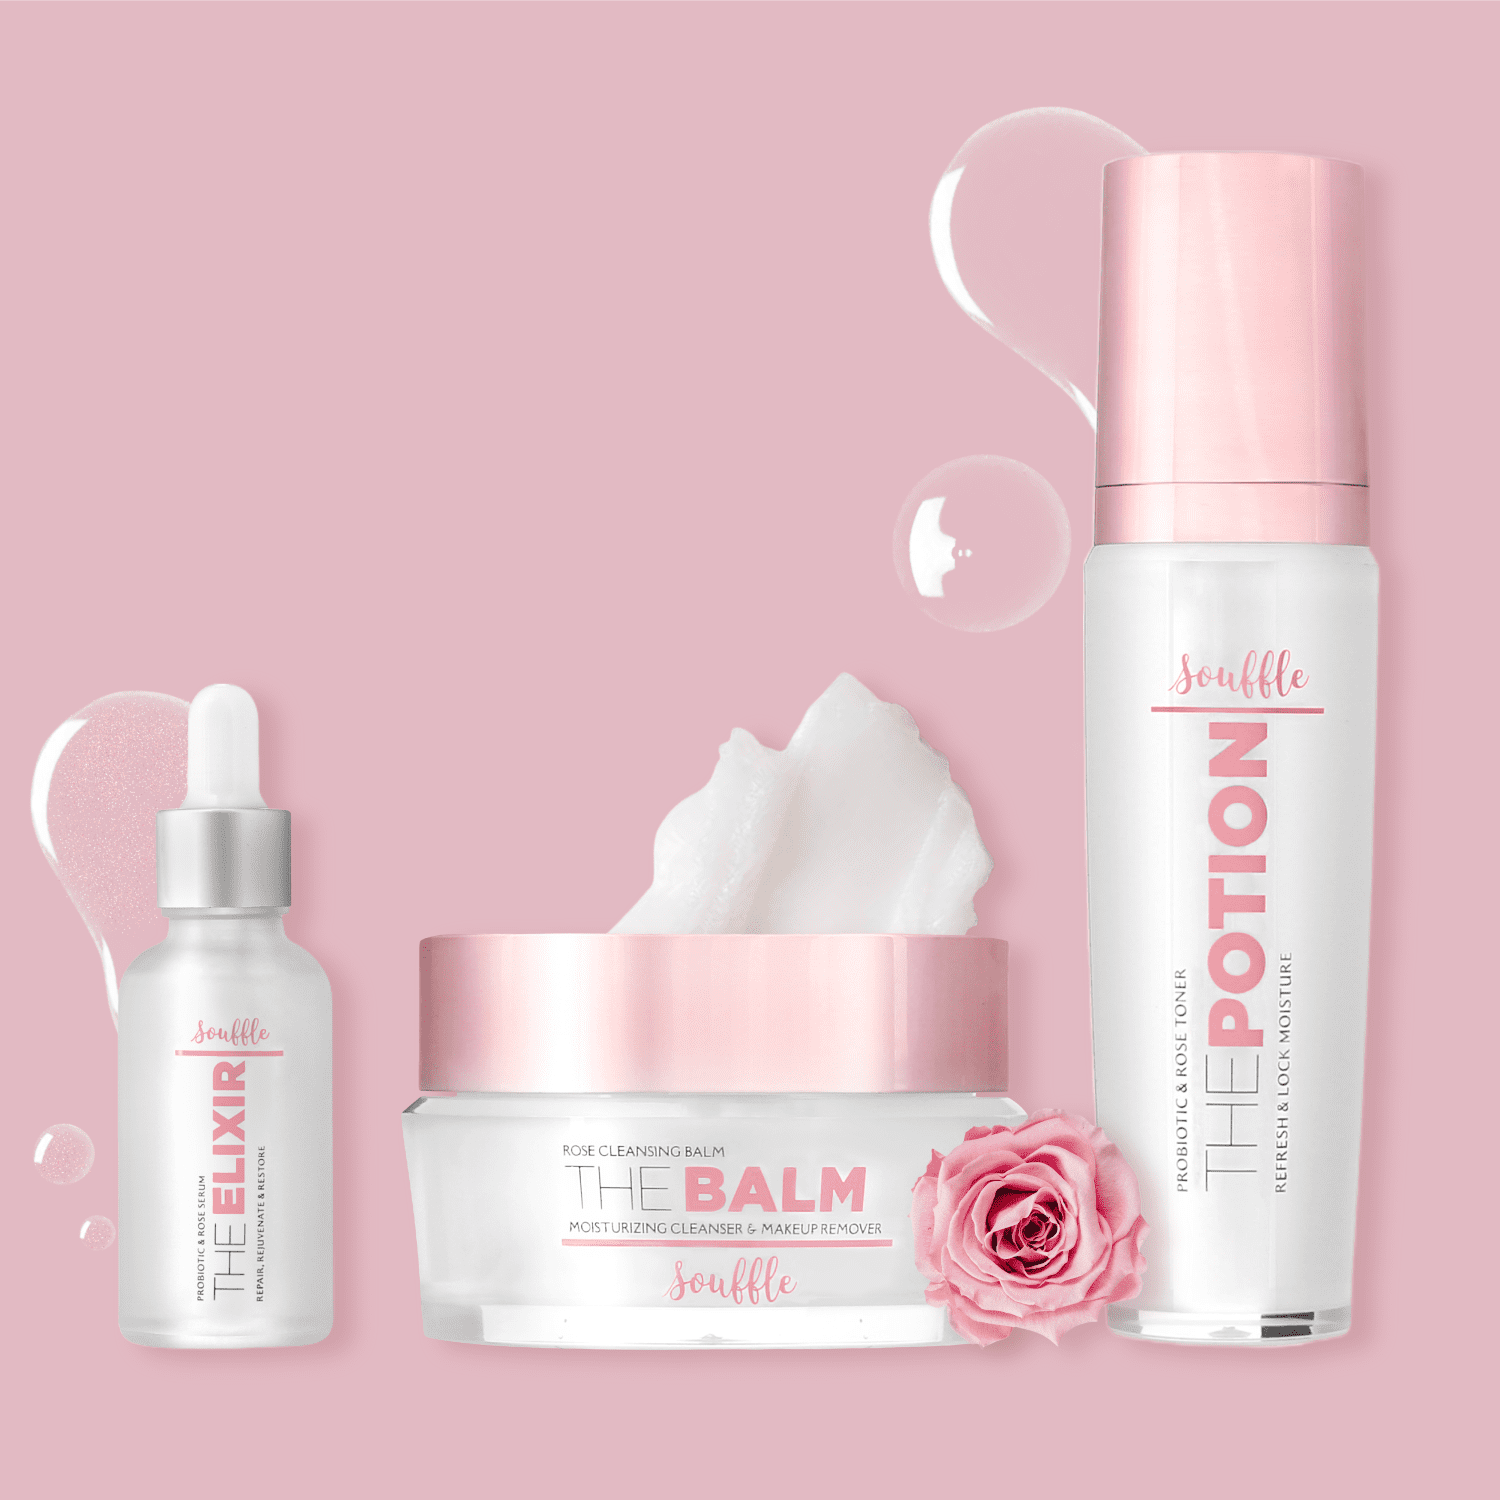 Souffle Beauty Trio Set Probiotic & Rose Toner and Serum with Rose Cleansing Balm